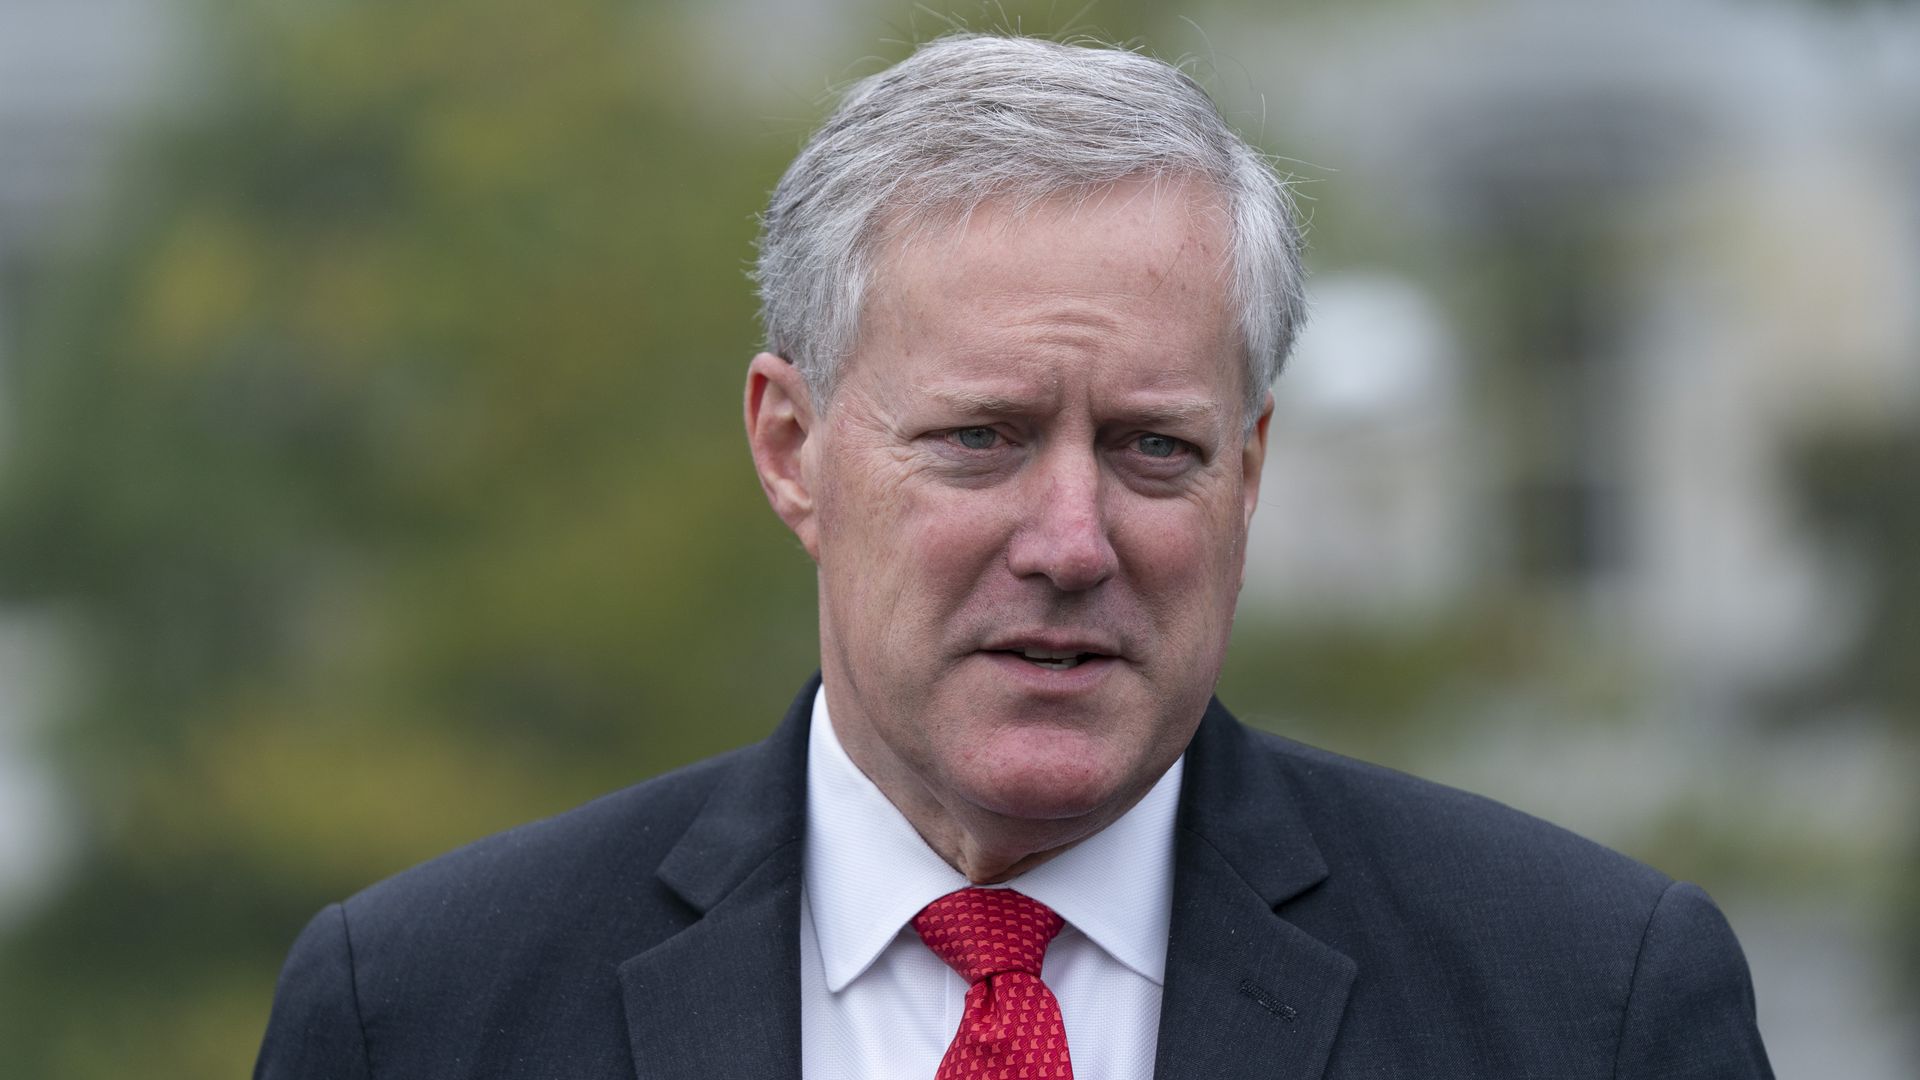 Mark Meadows, then-White House chief of staff, speaks to media outside of the White House in Washington, D.C., U.S., on Wednesday, Oct. 21, 2020. 